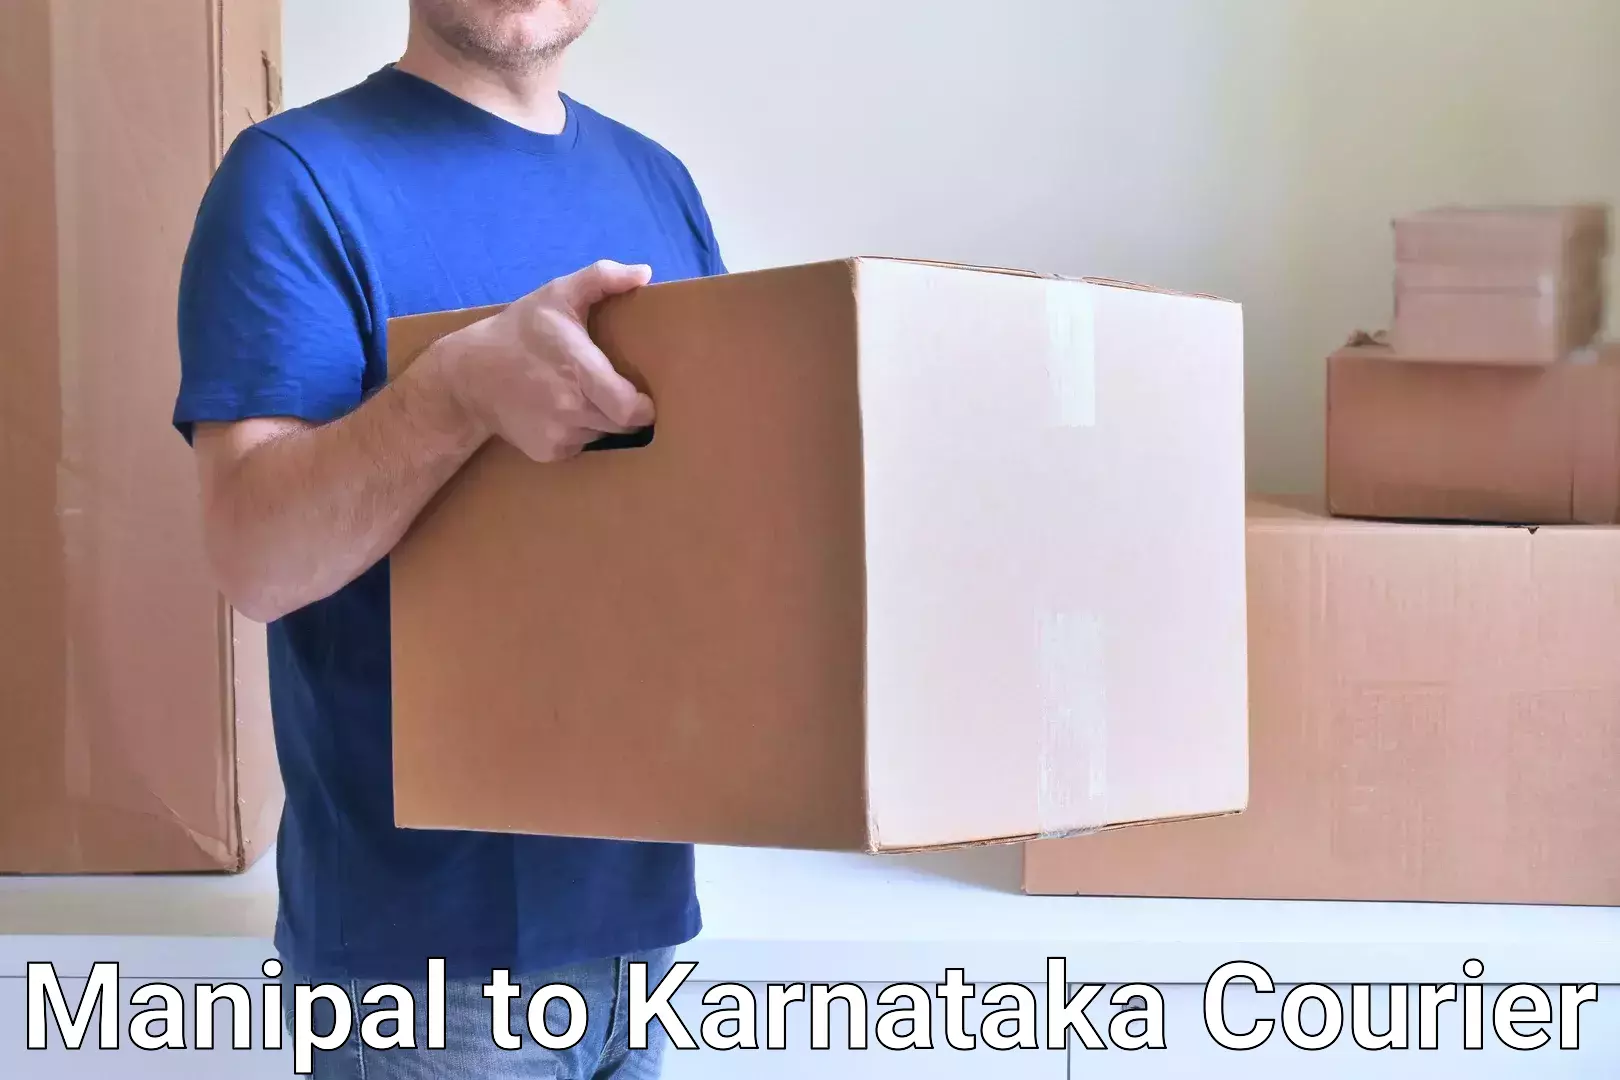 Reliable courier service Manipal to Bangarapet